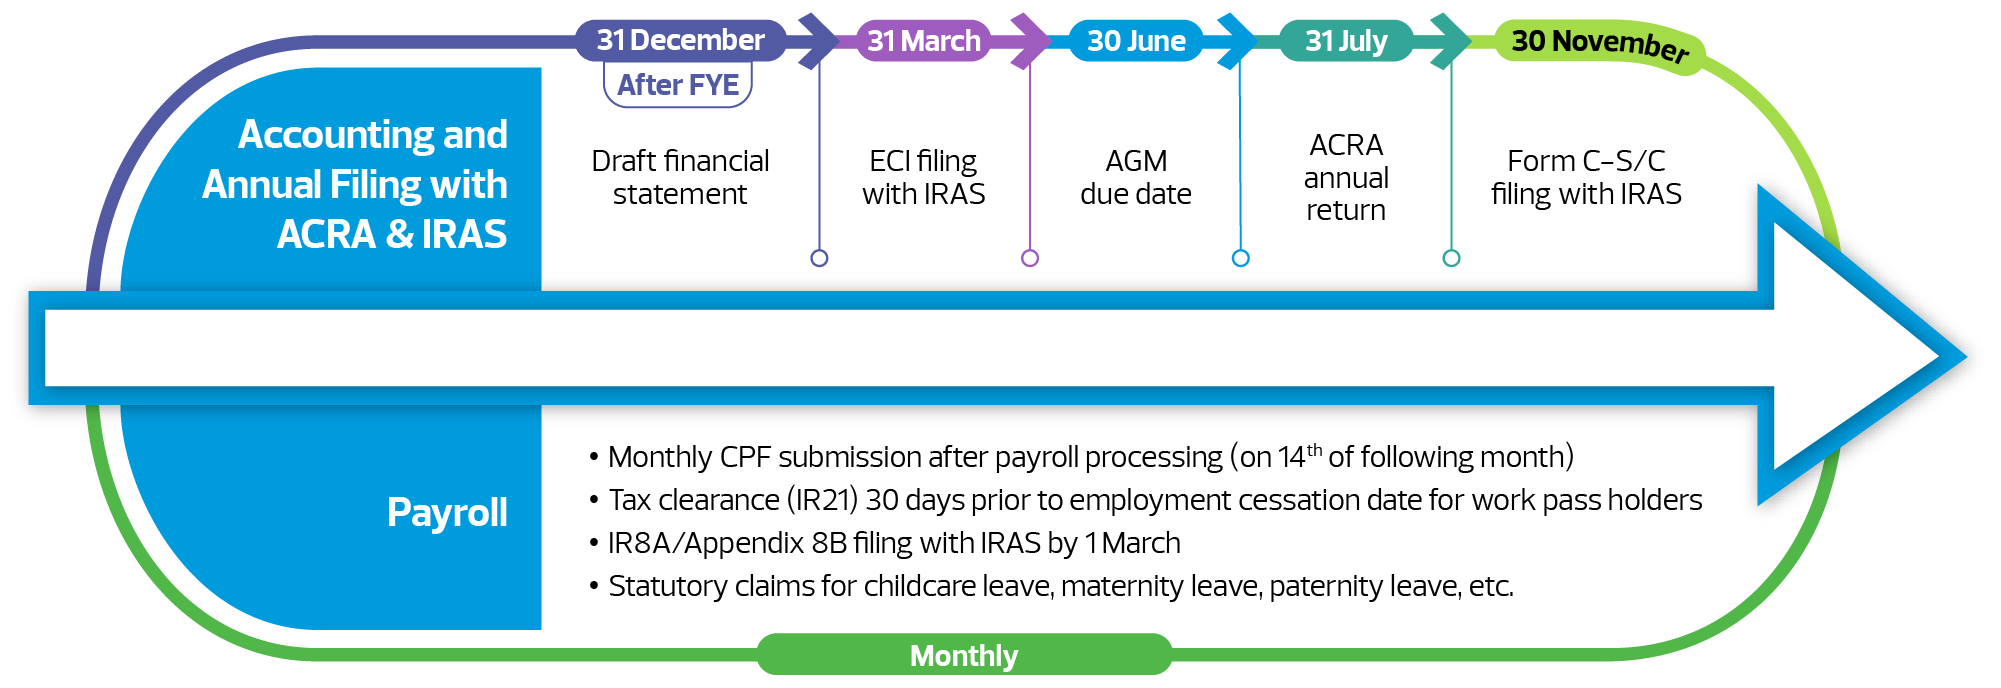 ACS_Website (Graph)_Annual Filing Timeline